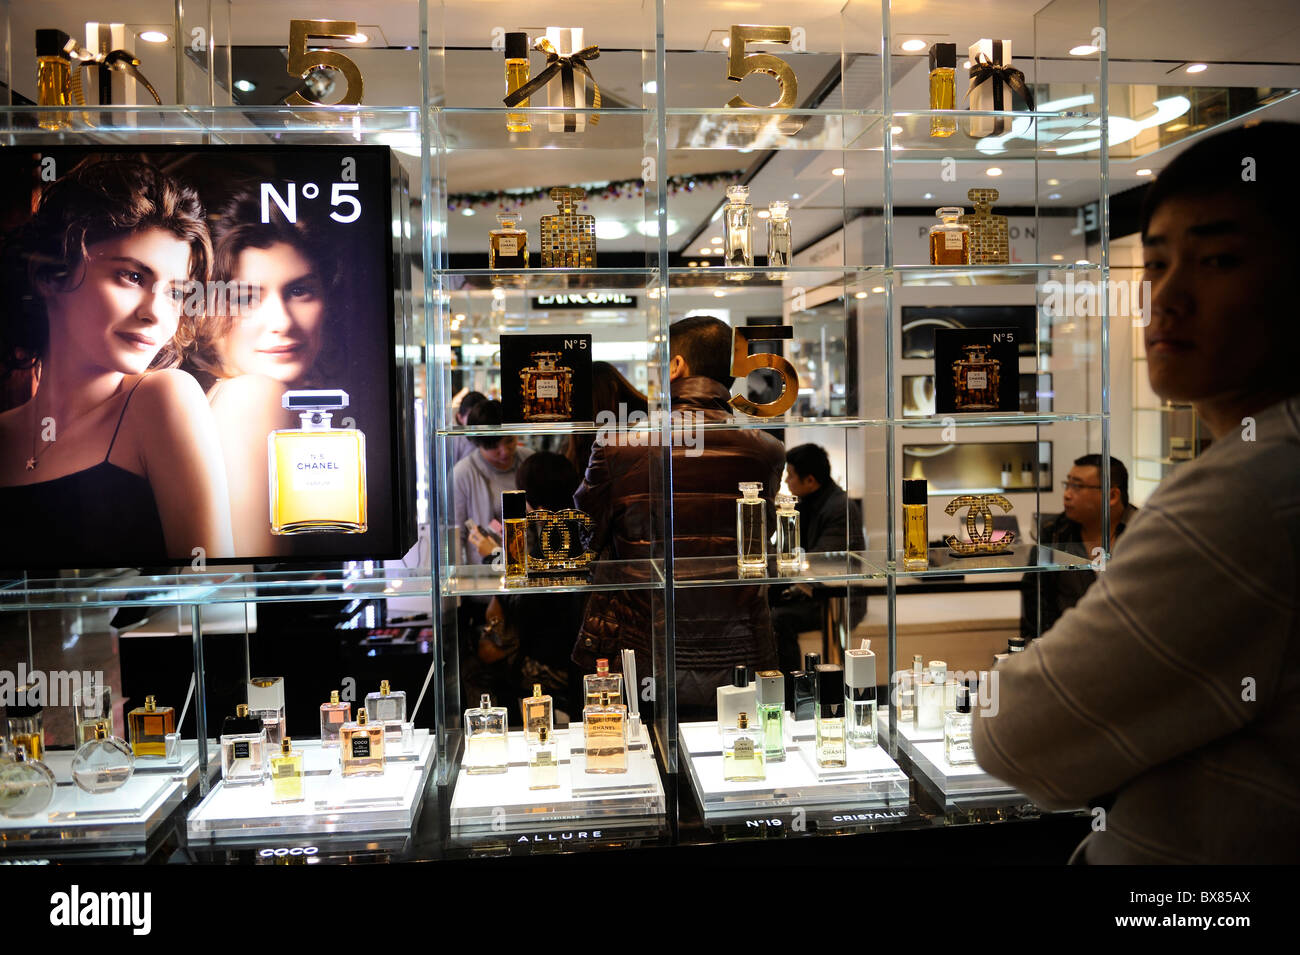 Chinese men buying or waiting at Chanel perfume stand in a shopping mall in Beijing, China. 12-Dec-2010 Stock Photo